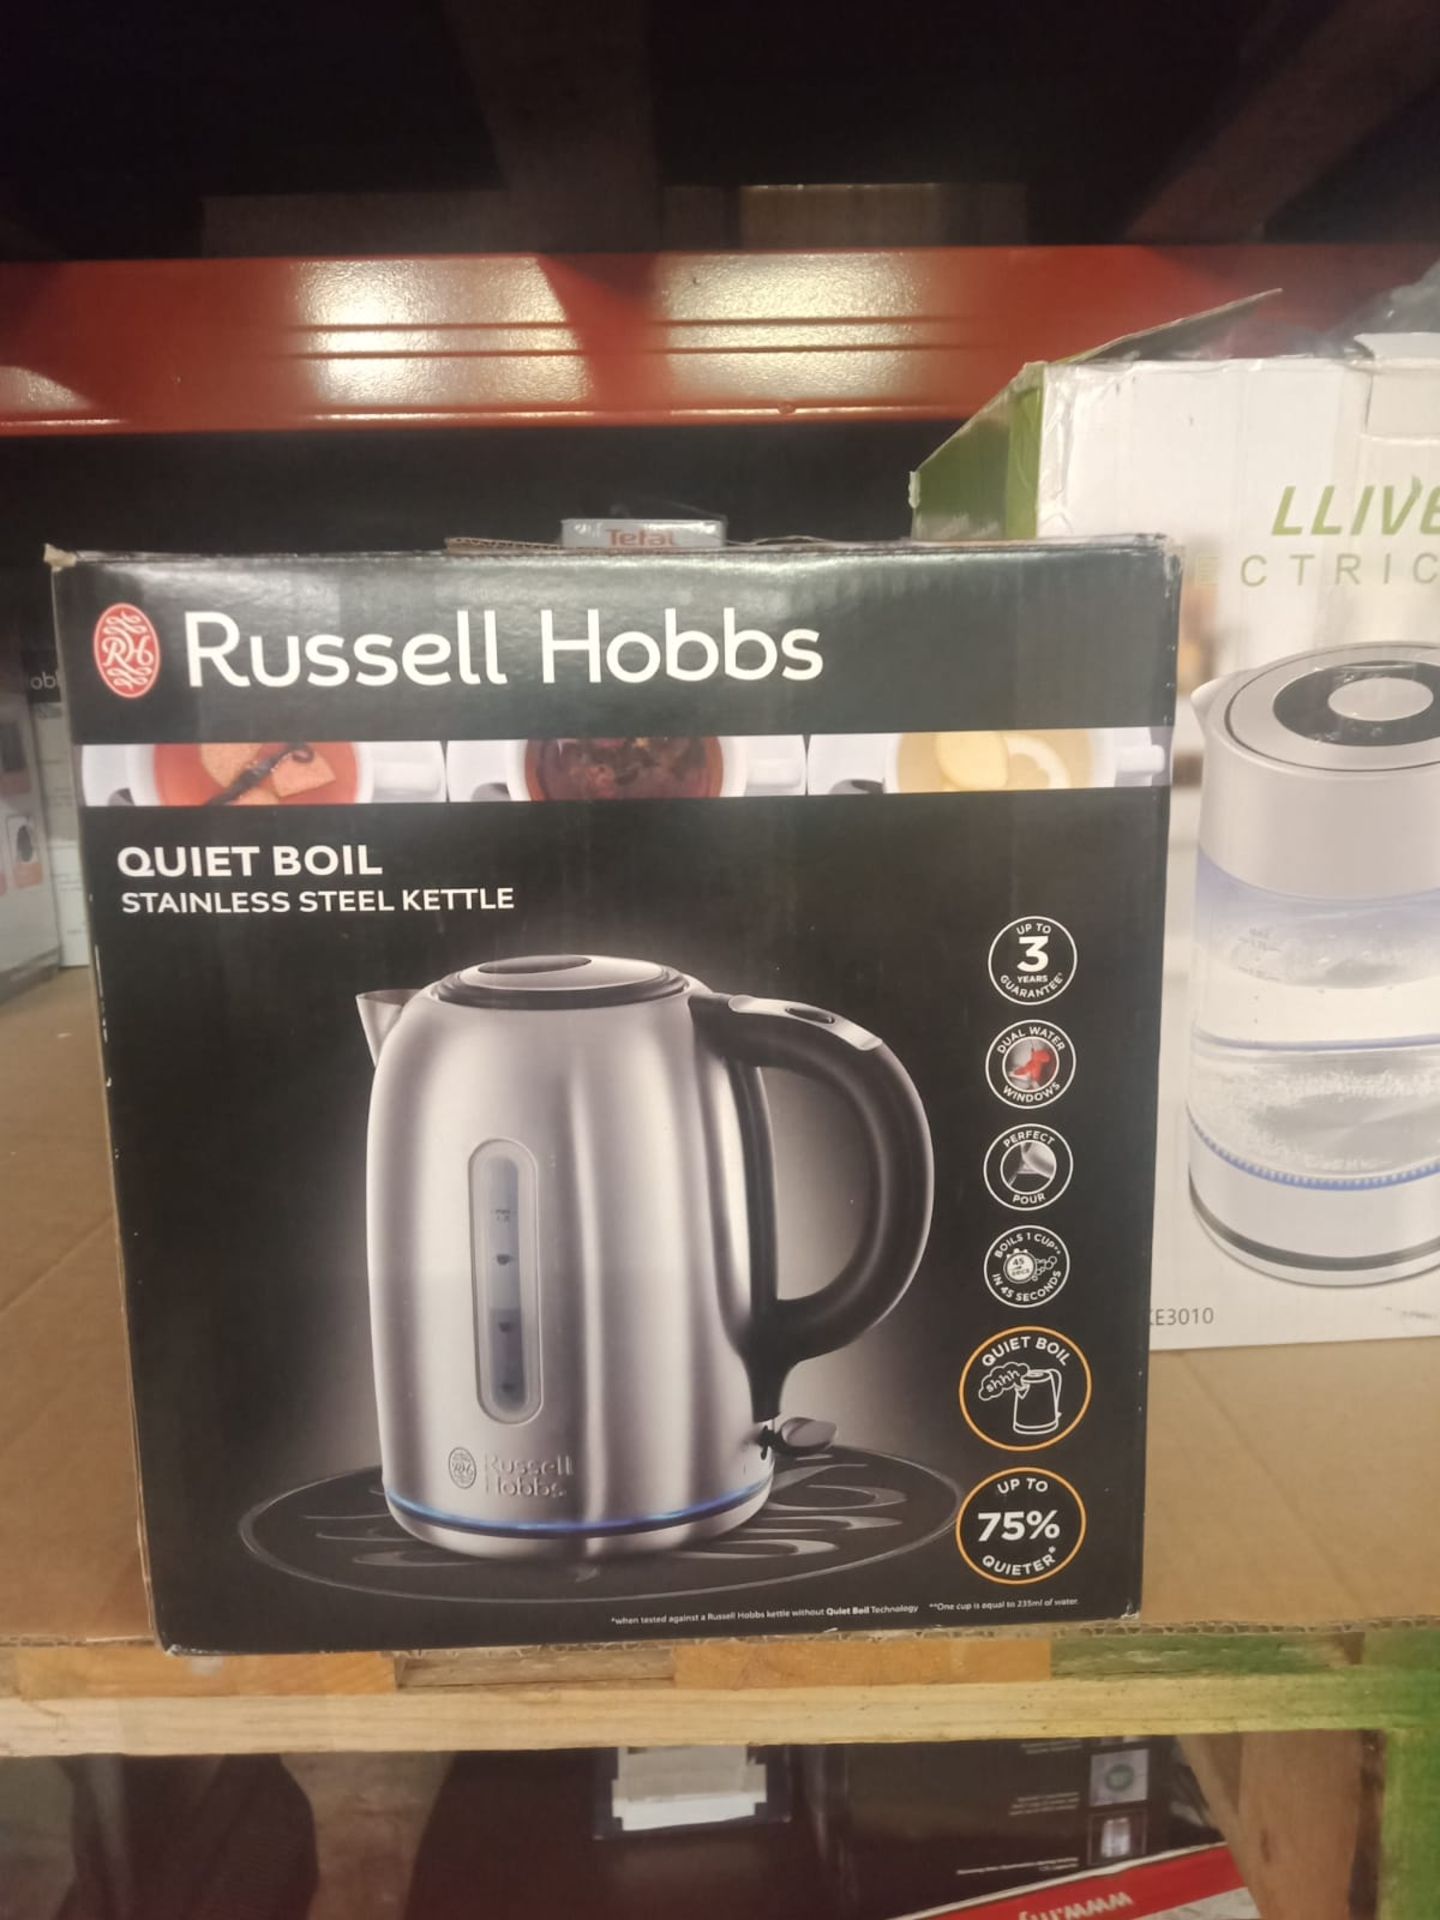 JOB LOT OF VARIOUS ELECTRONICS - WHICH INCLUDE, RUSSELL HOBBS IRON, POPCORN MAKER, TOASTER, BLENDER - Image 13 of 19